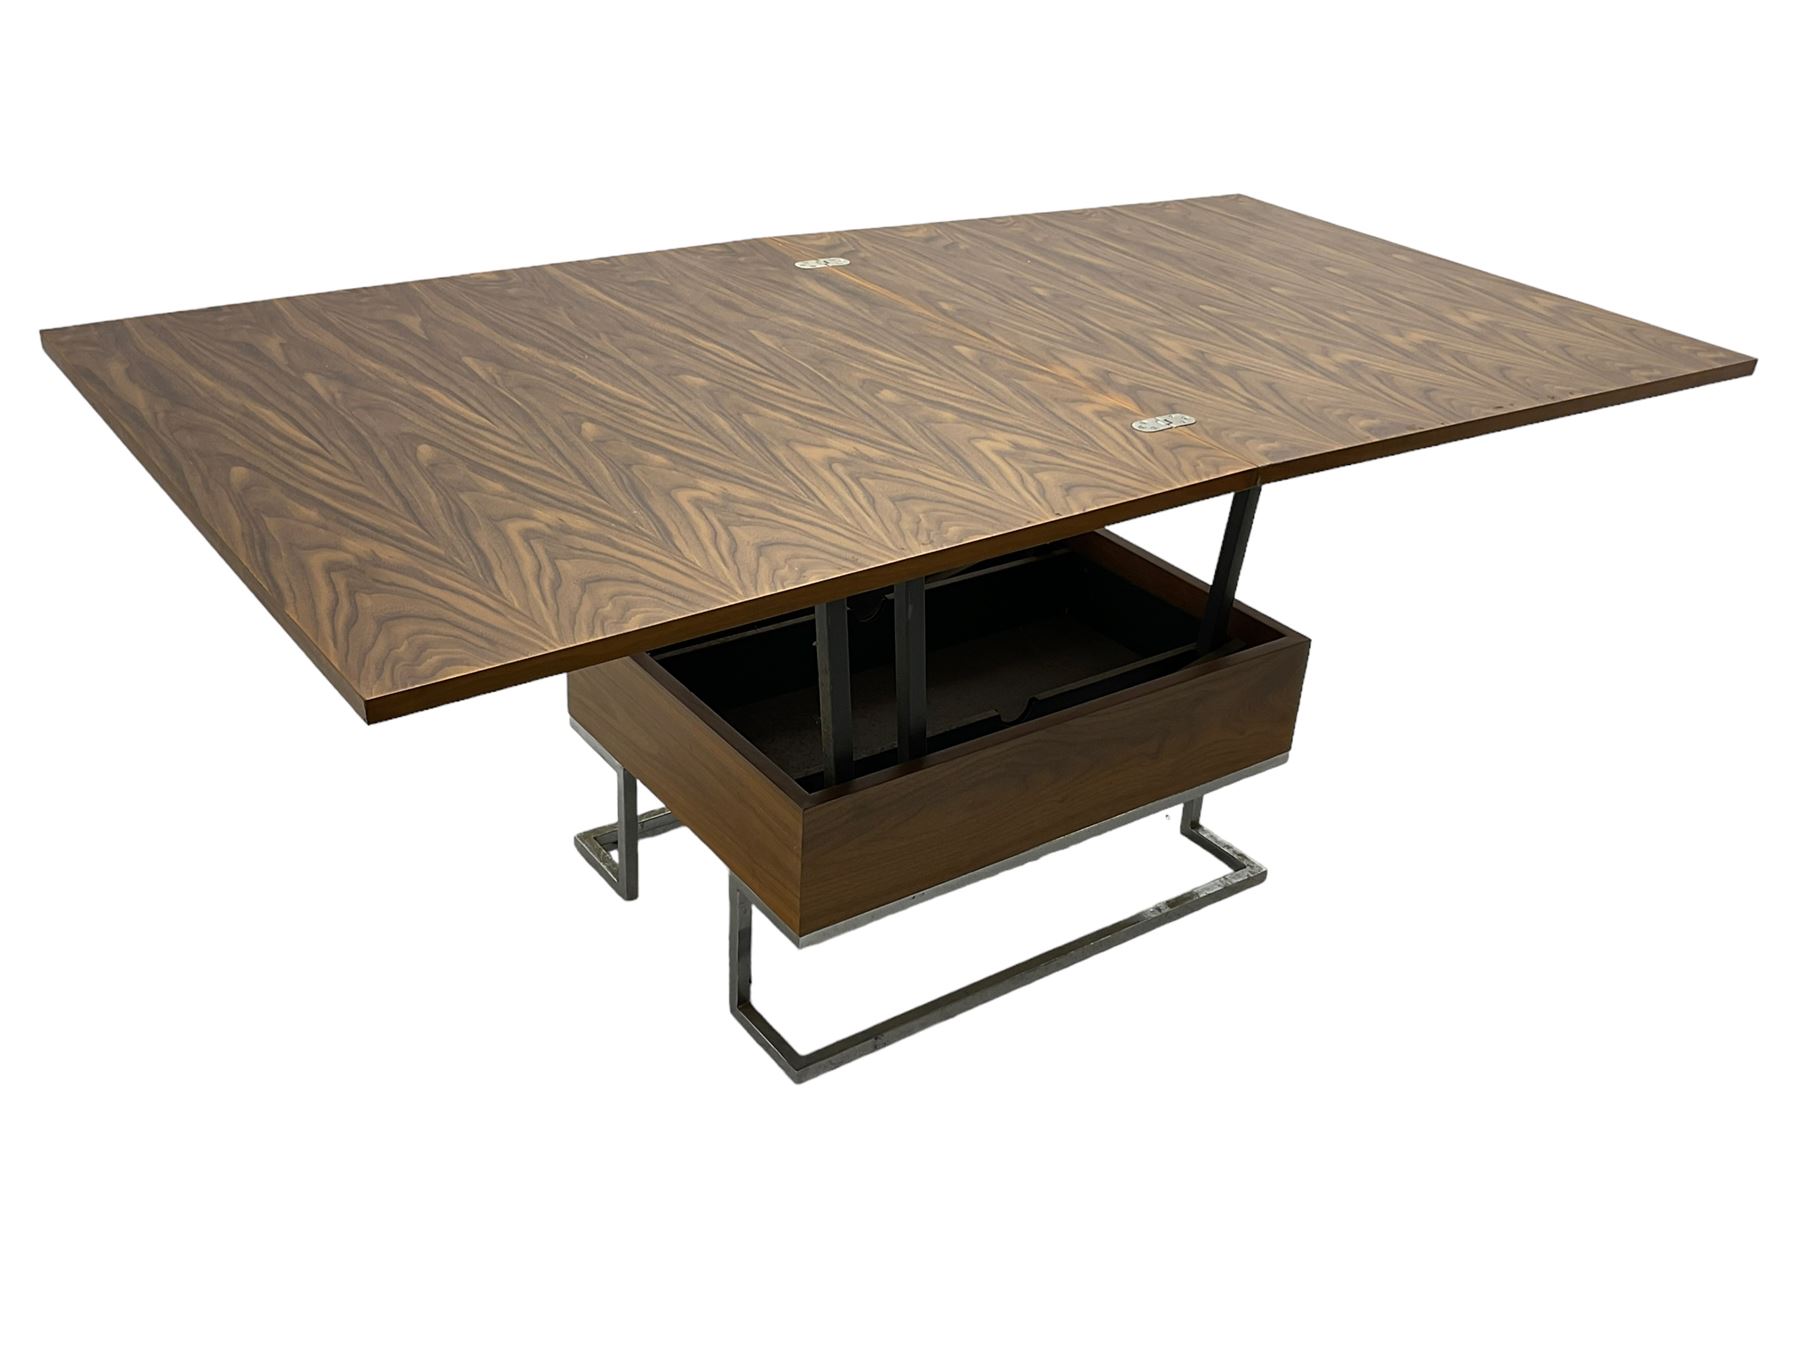 Contemporary walnut metamorphic coffee or dining table - Image 7 of 7